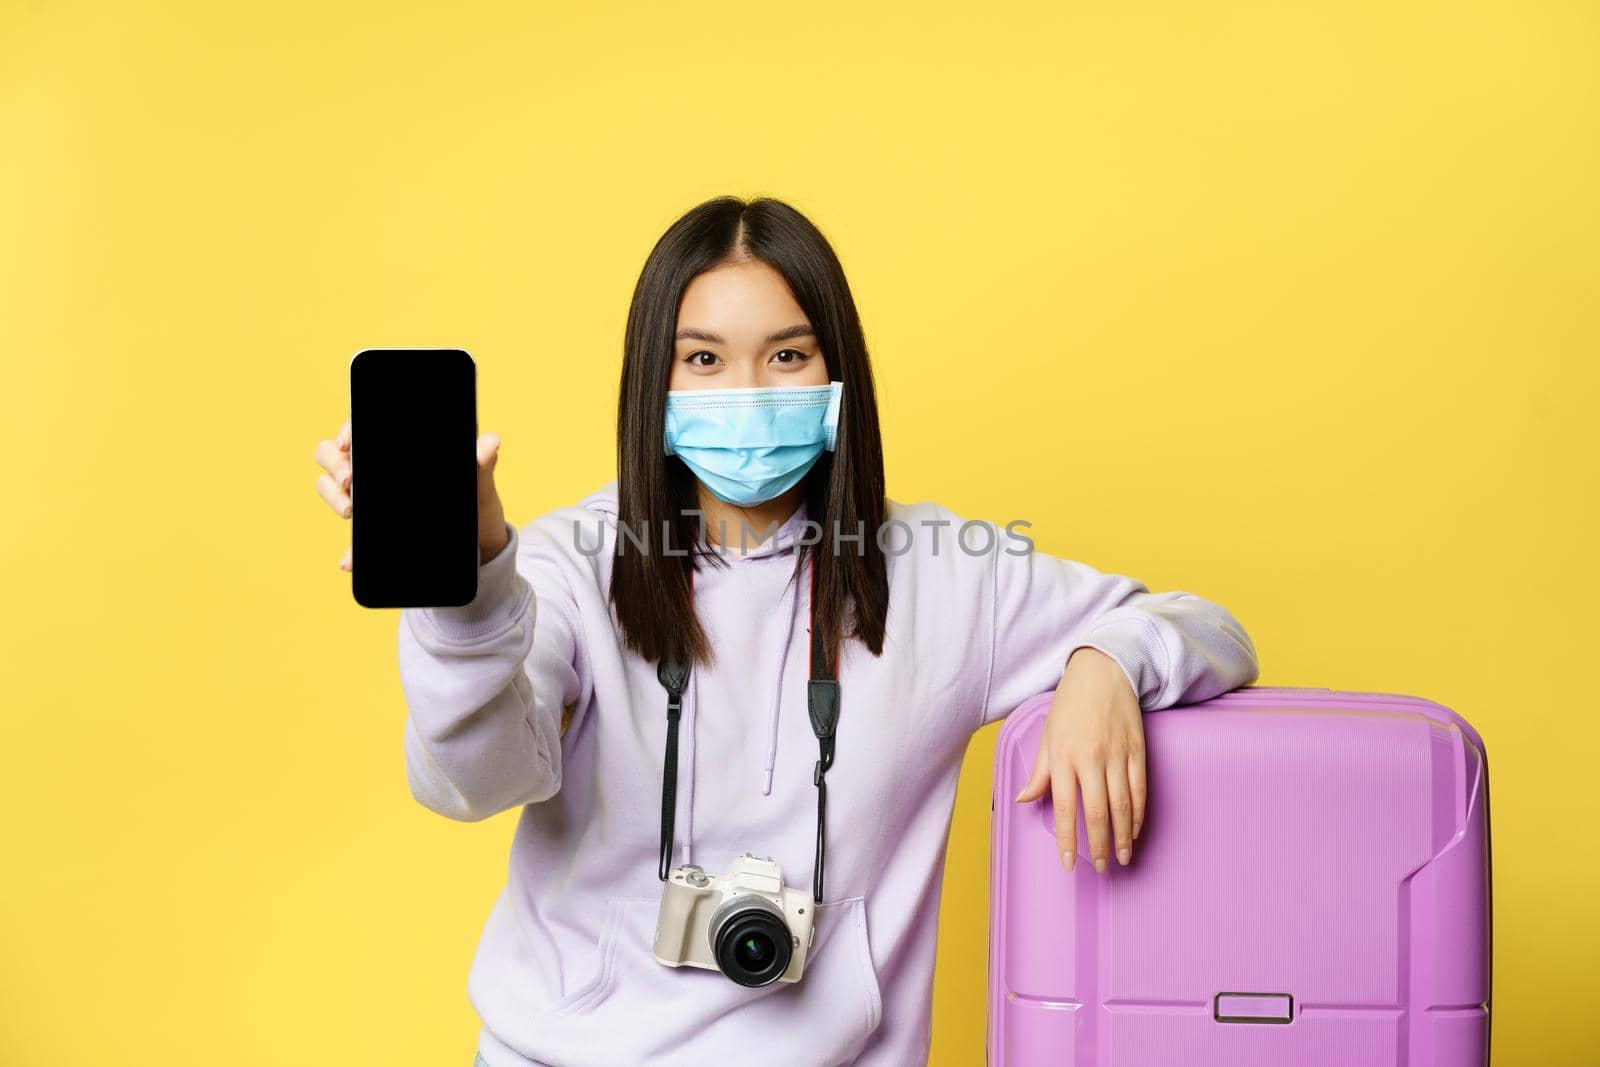 Image of girl traveller, asian tourist shows her phone screen, covid health passport on smartphone app, wearing medical mask and suitcase, yellow background.